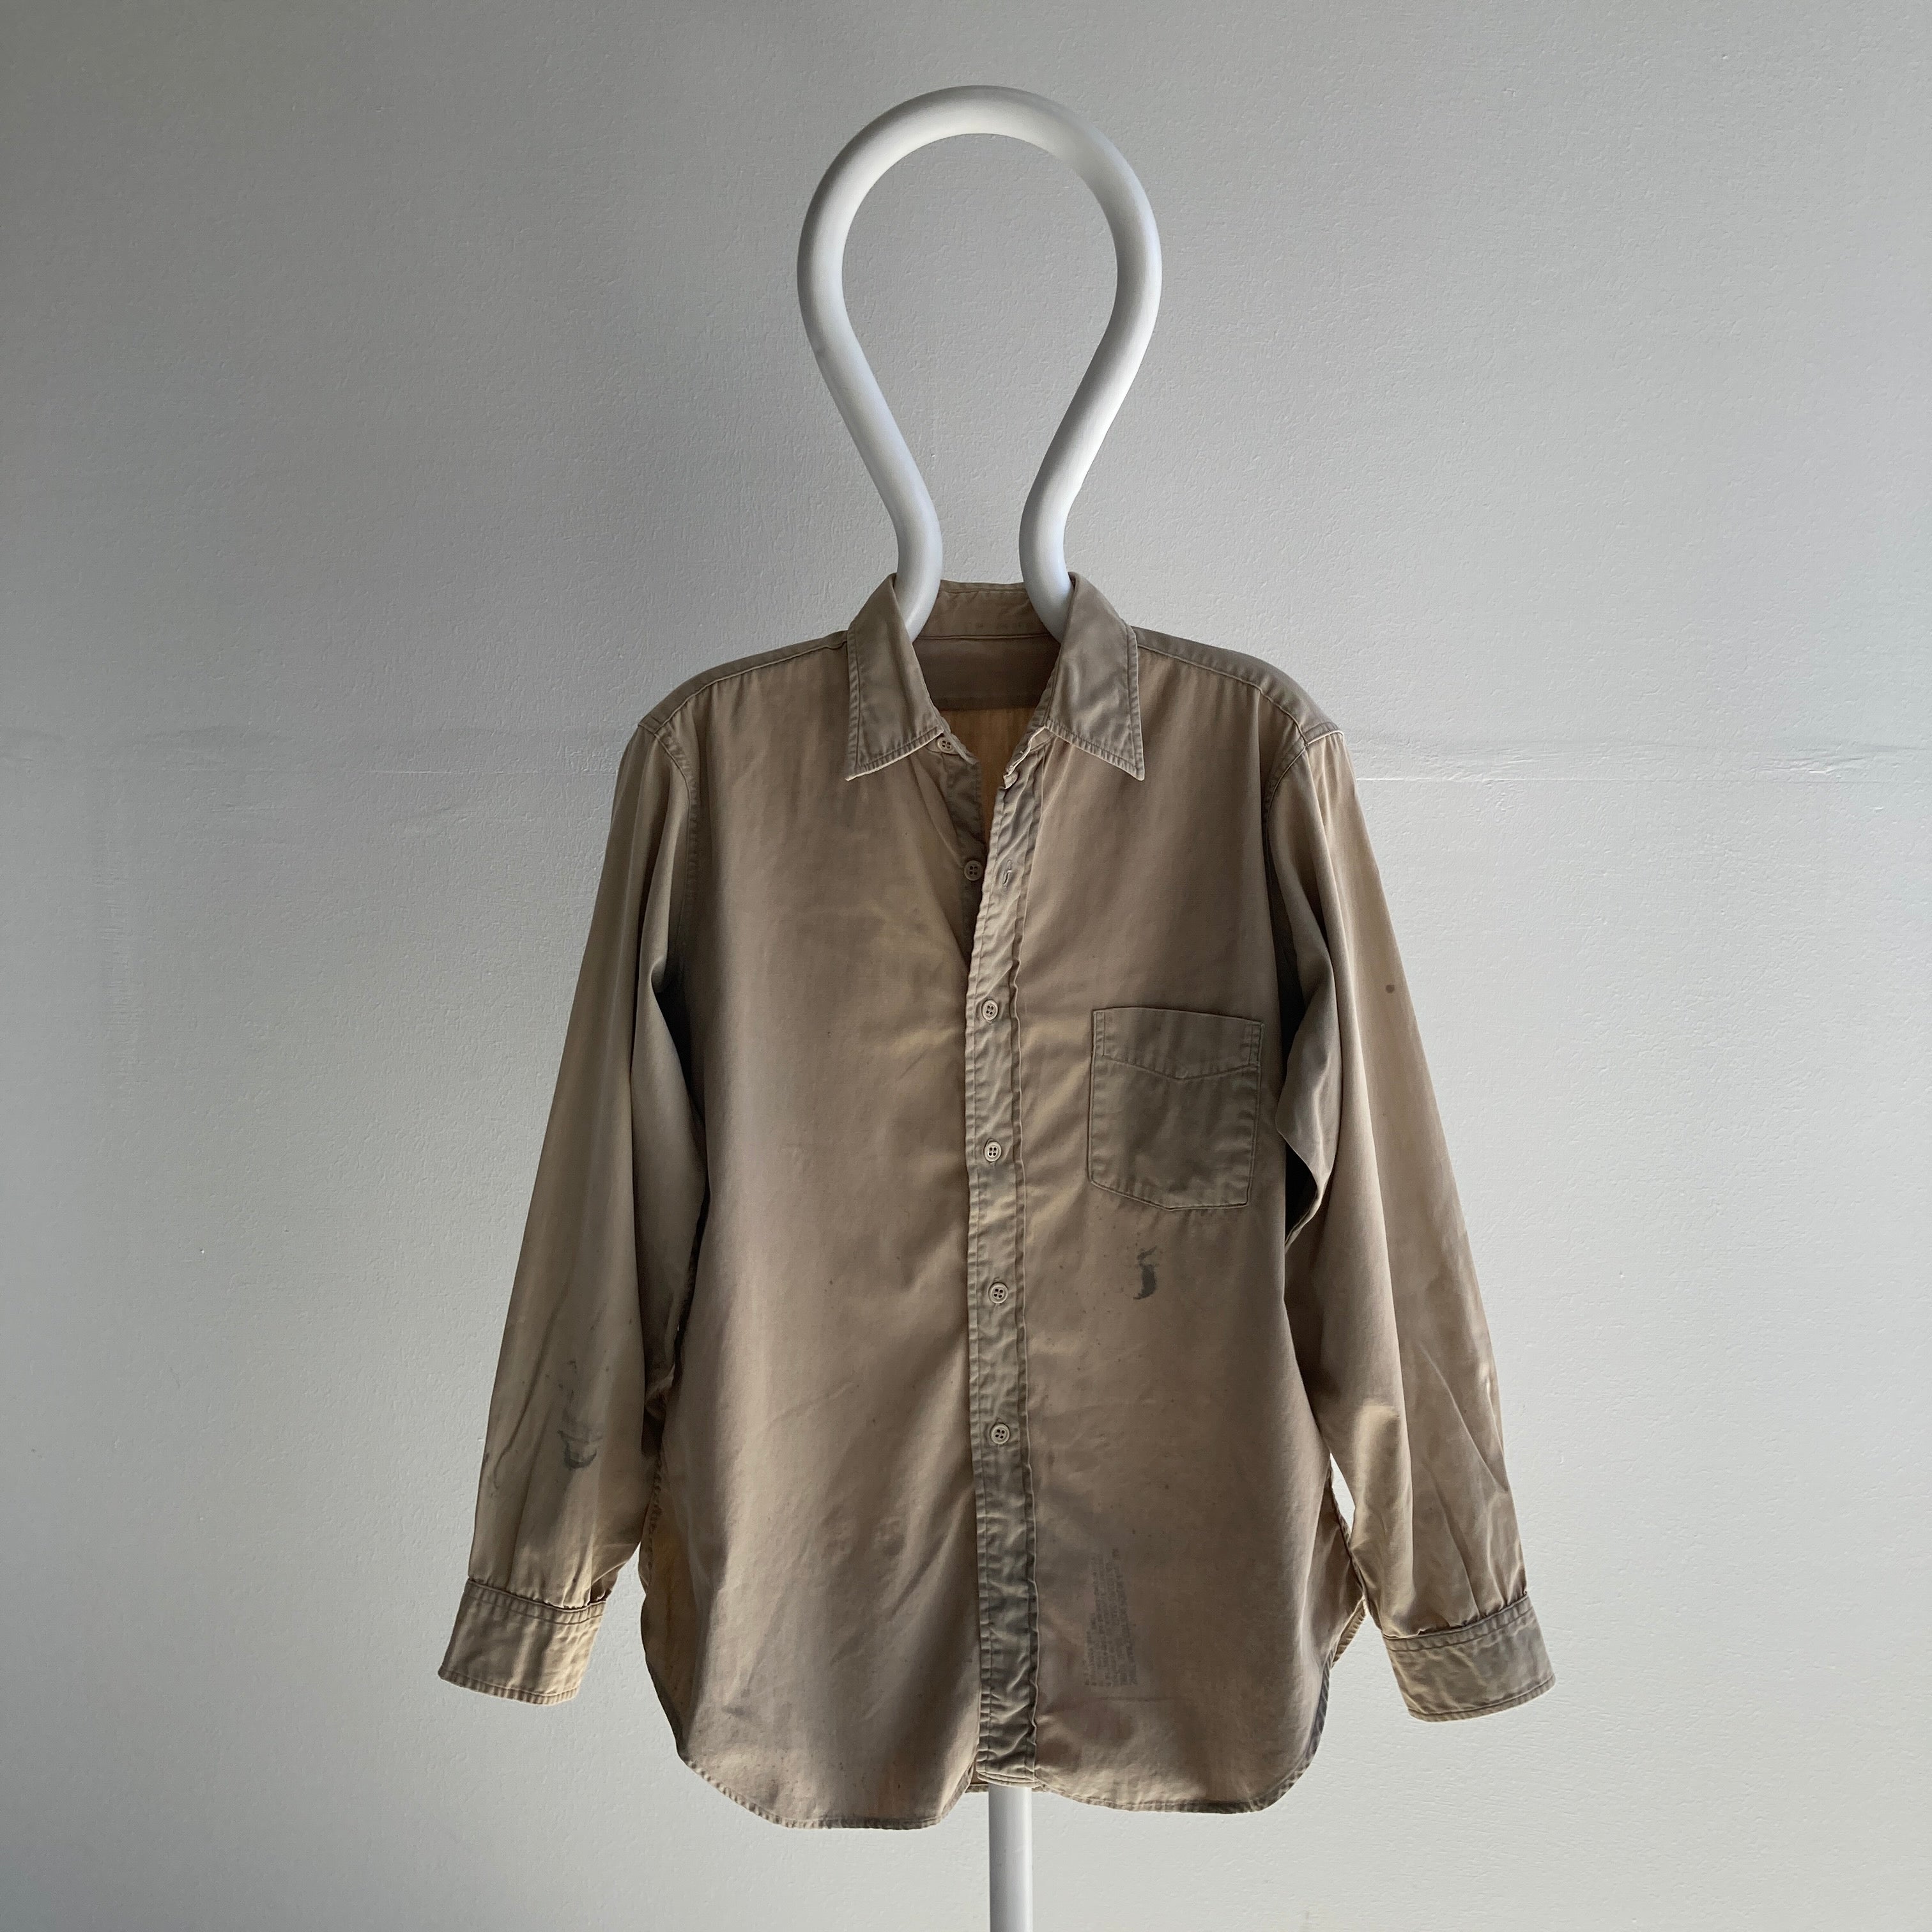 Sept 9, 1954 Made in Tennessee Beat Up Khaki Cotton Button Down Shirt